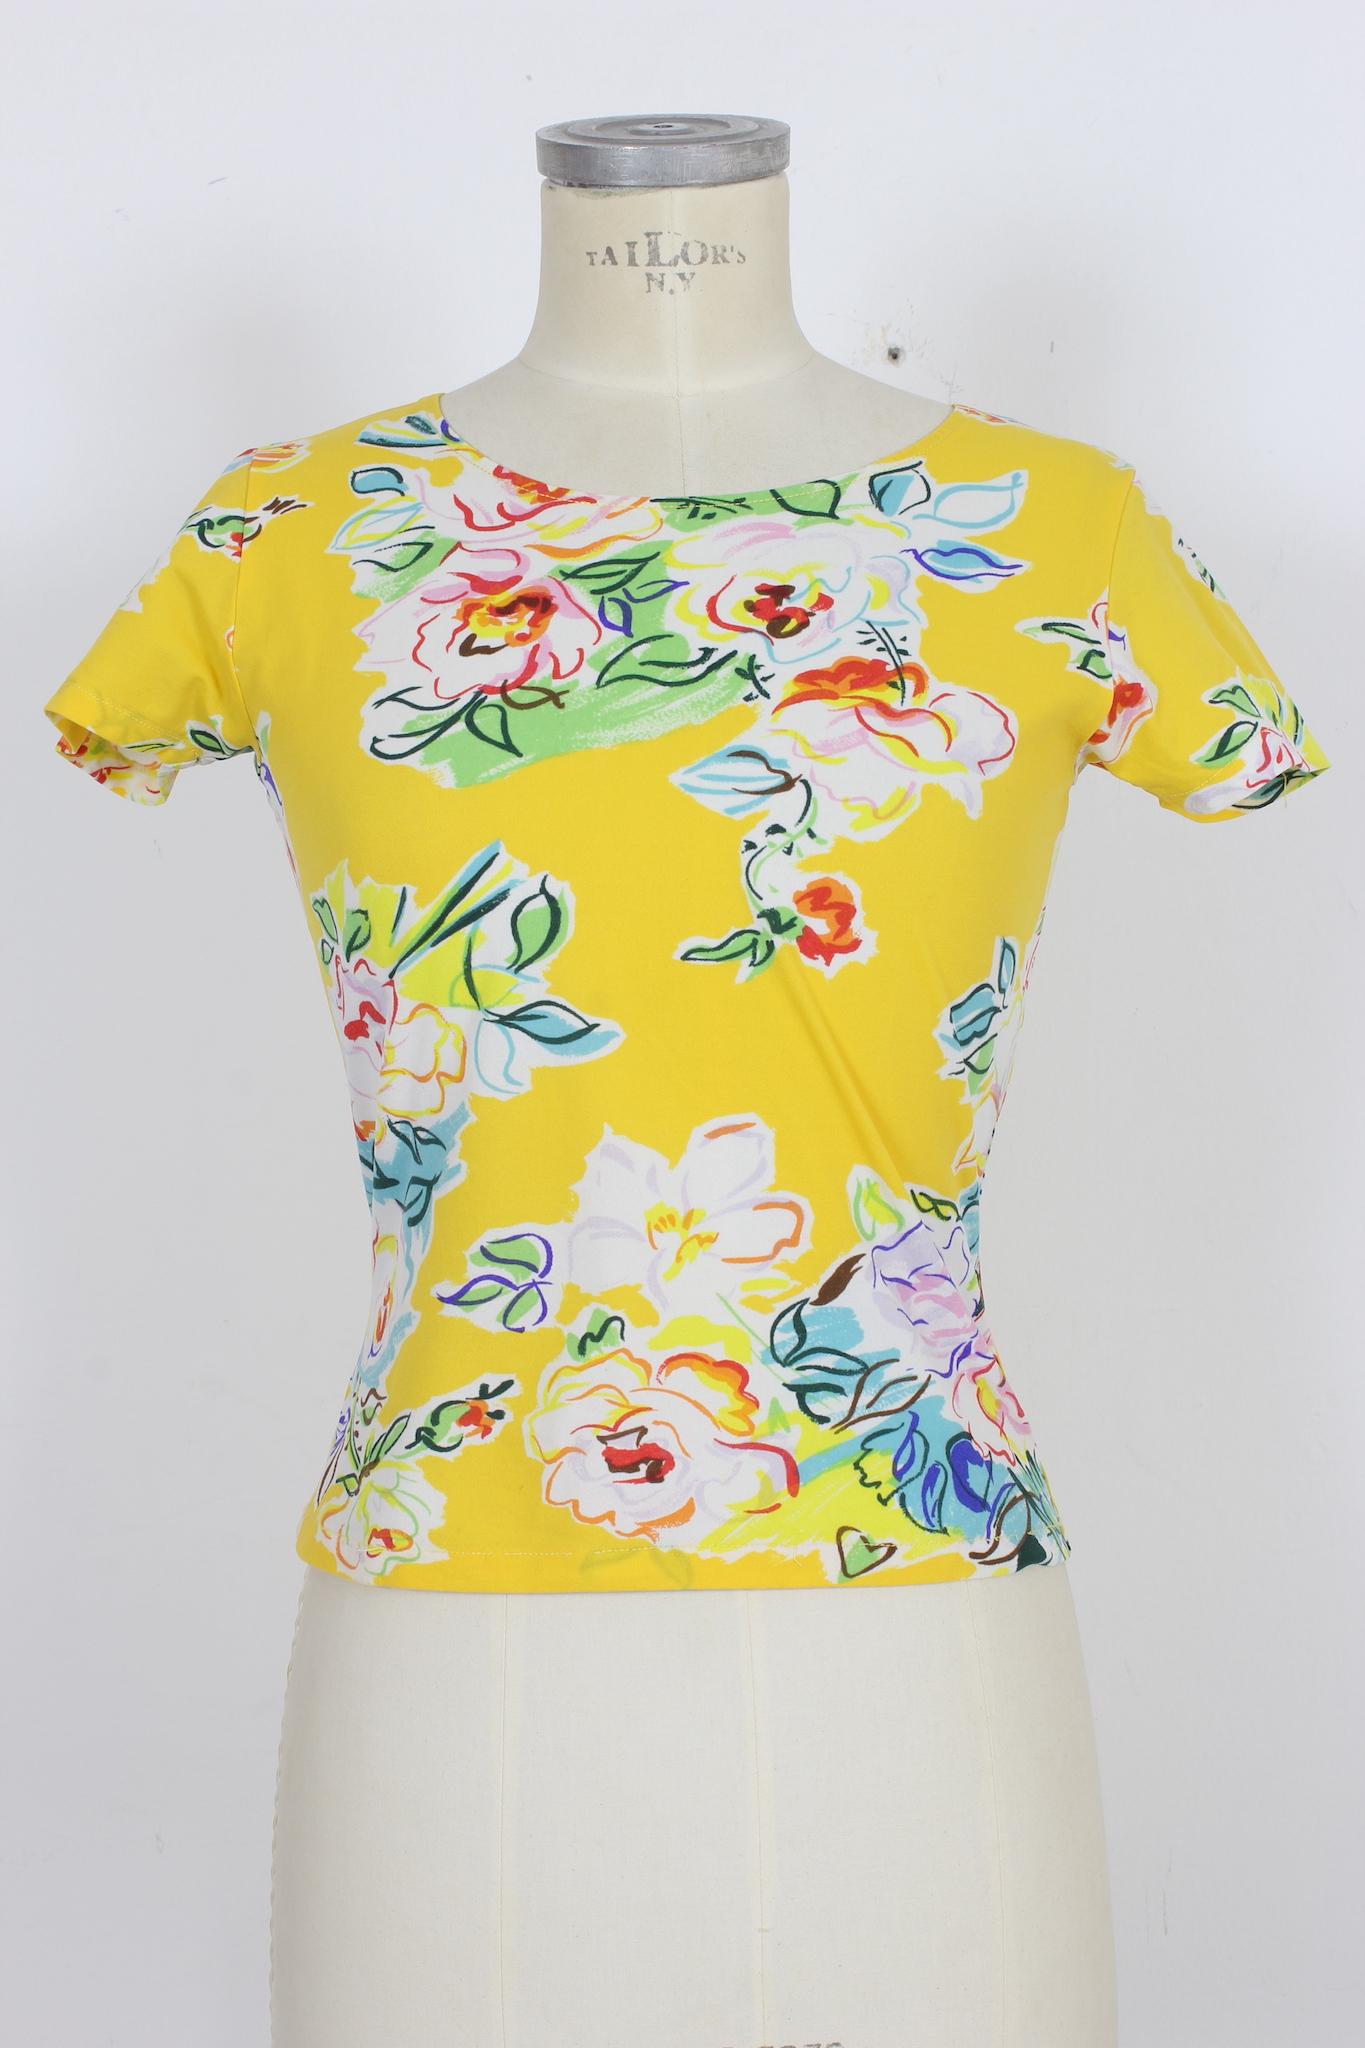 This Kenzo vintage 2000s t shirt is the perfect choice for a casual, summer wardrobe. The yellow and multicolor floral design adds a vintage touch to the 2000s silhouette, and the short sleeves mean you can stay cool even on the hottest days.

Size: